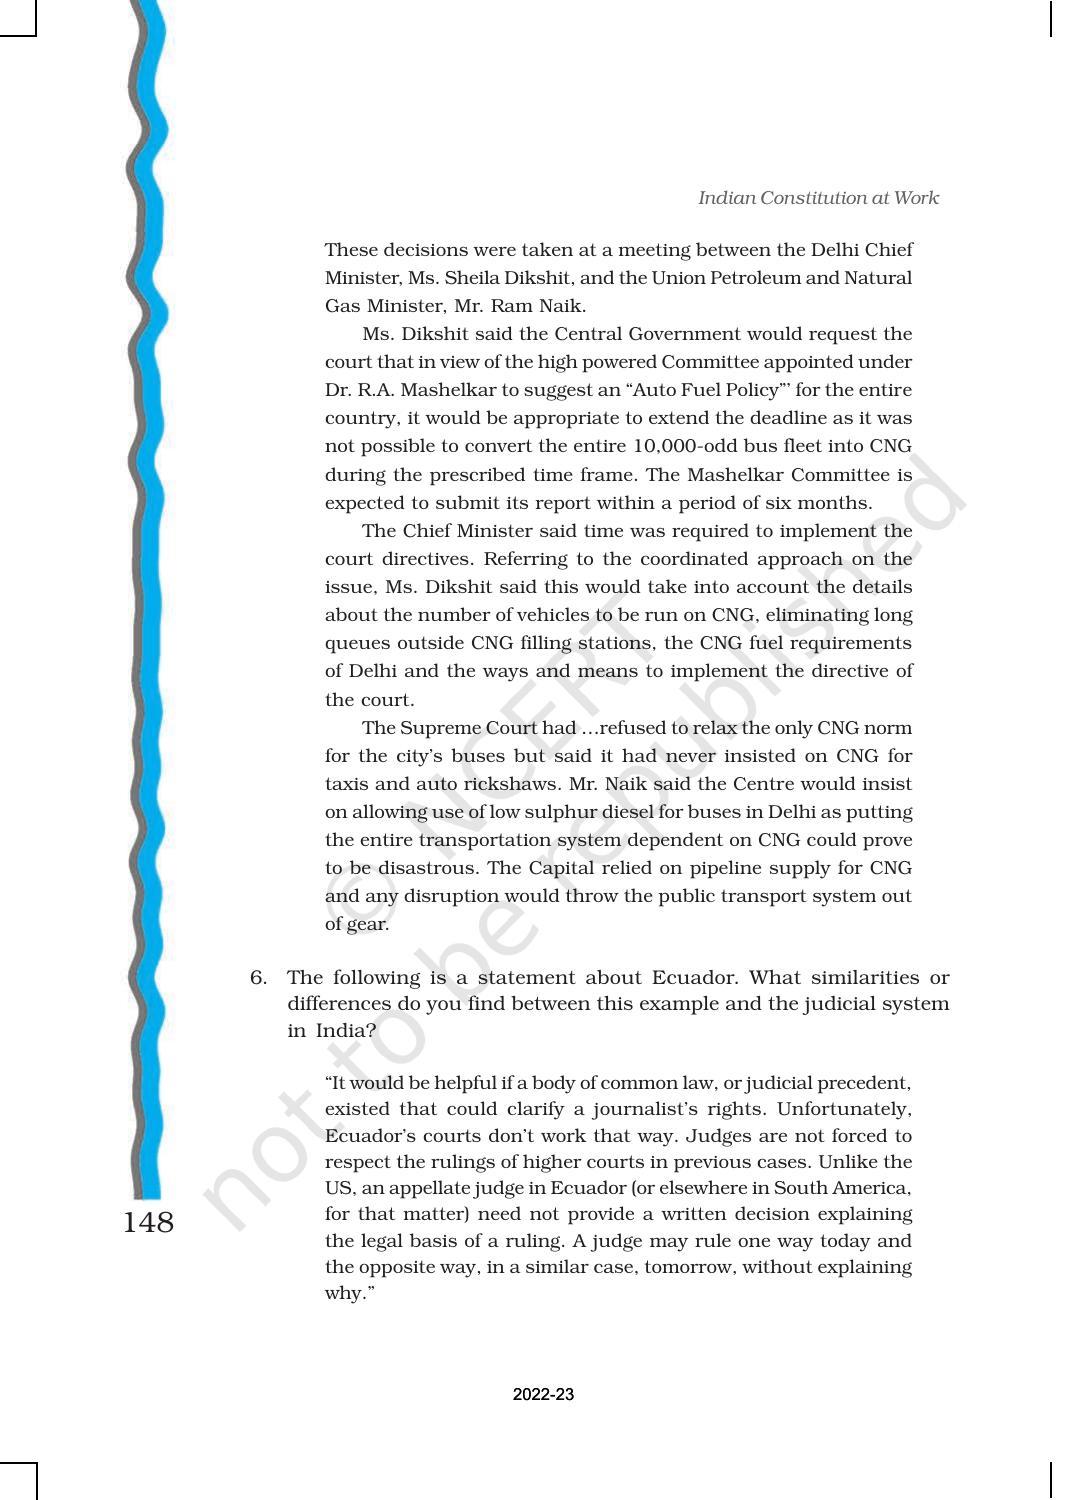 NCERT Book for Class 11 Political Science (Indian Constitution at Work) Chapter 6 Judiciary - Page 25